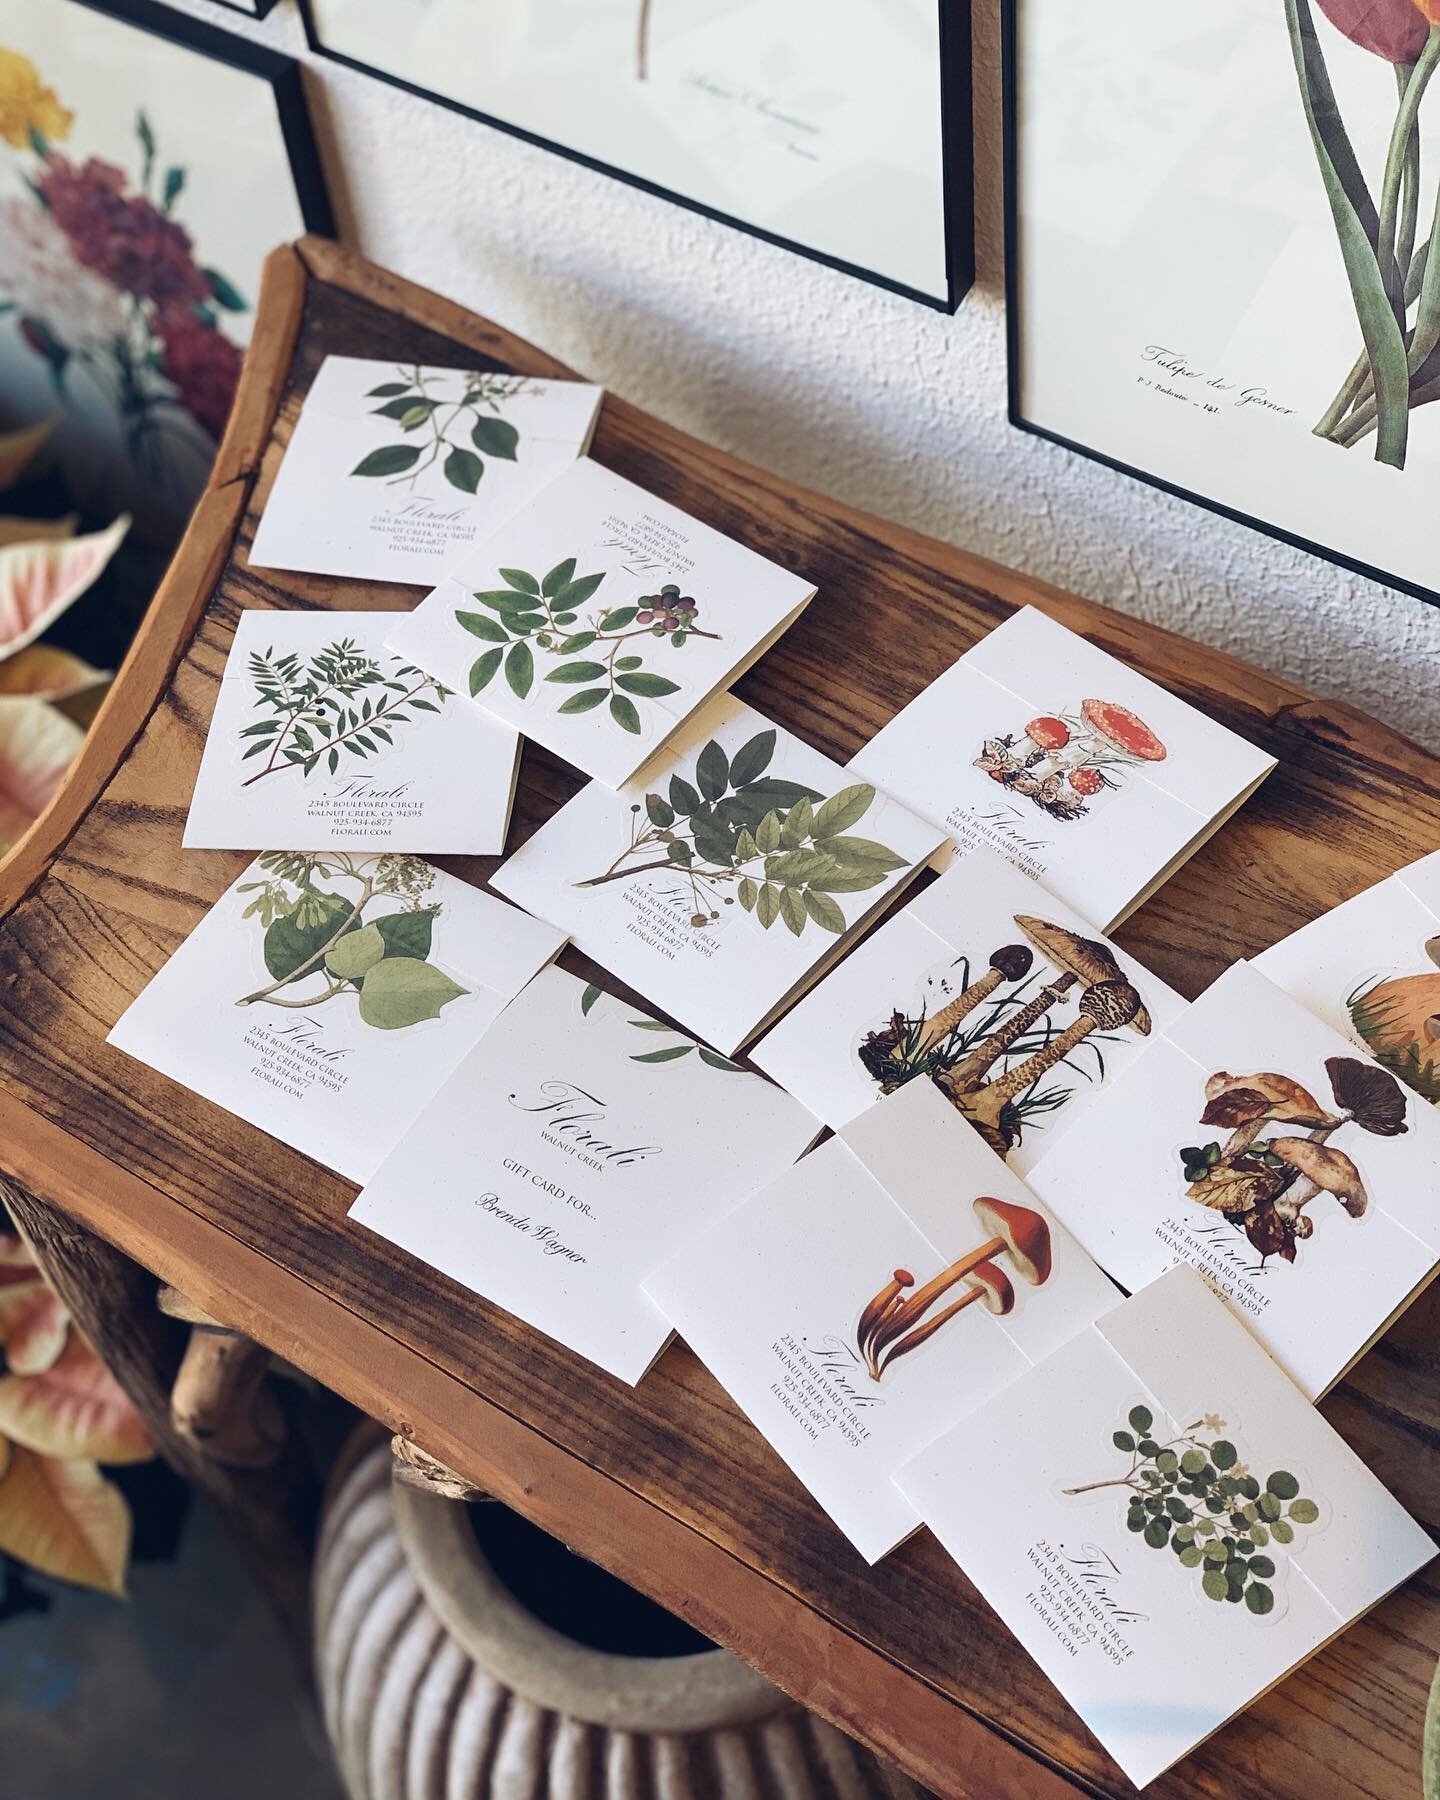 Stepping up our stationery game 🍄 🌿